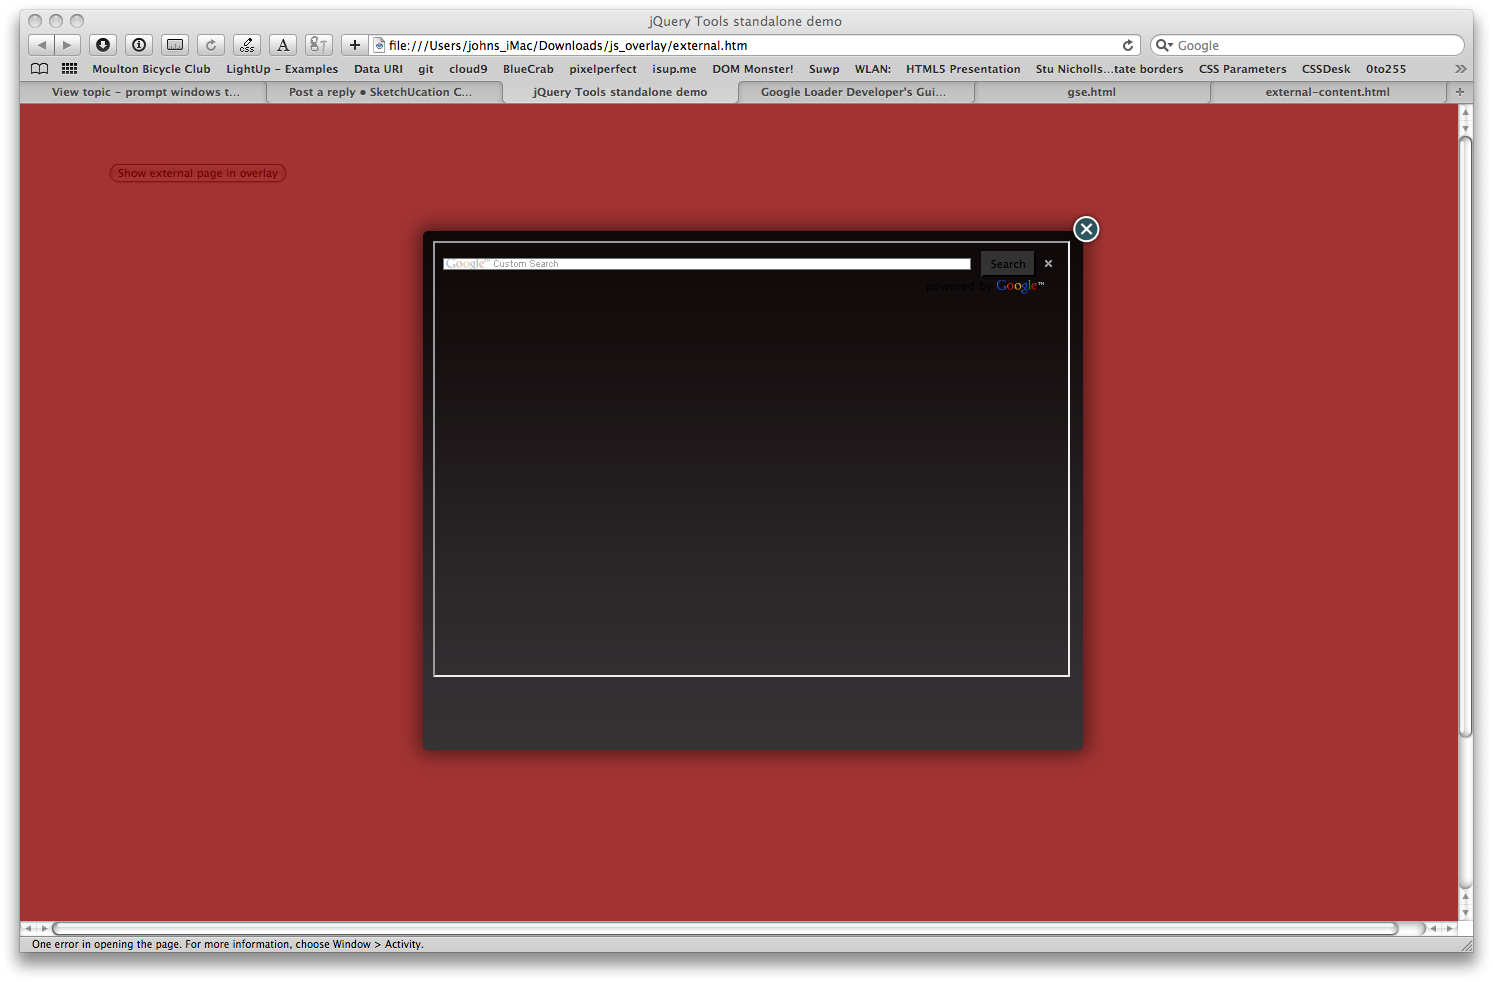 in Safari, the input box line-height is very short...